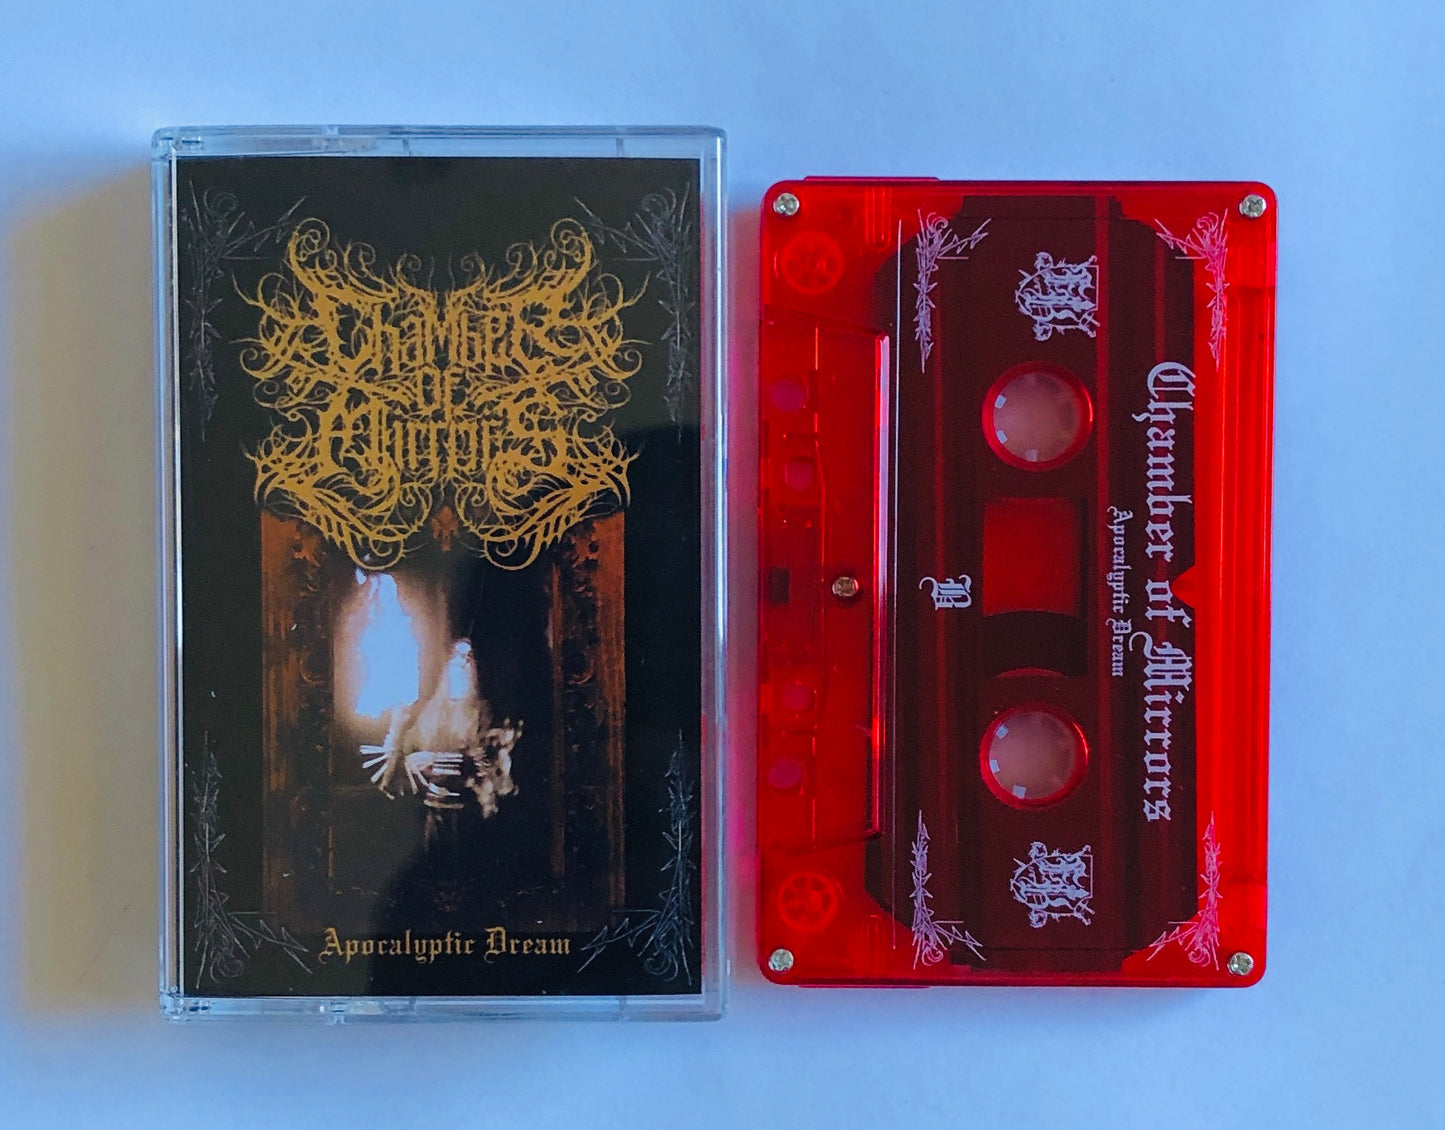 Chamber of Mirrors (US) "Apocalyptic Dream" - Pro Tape